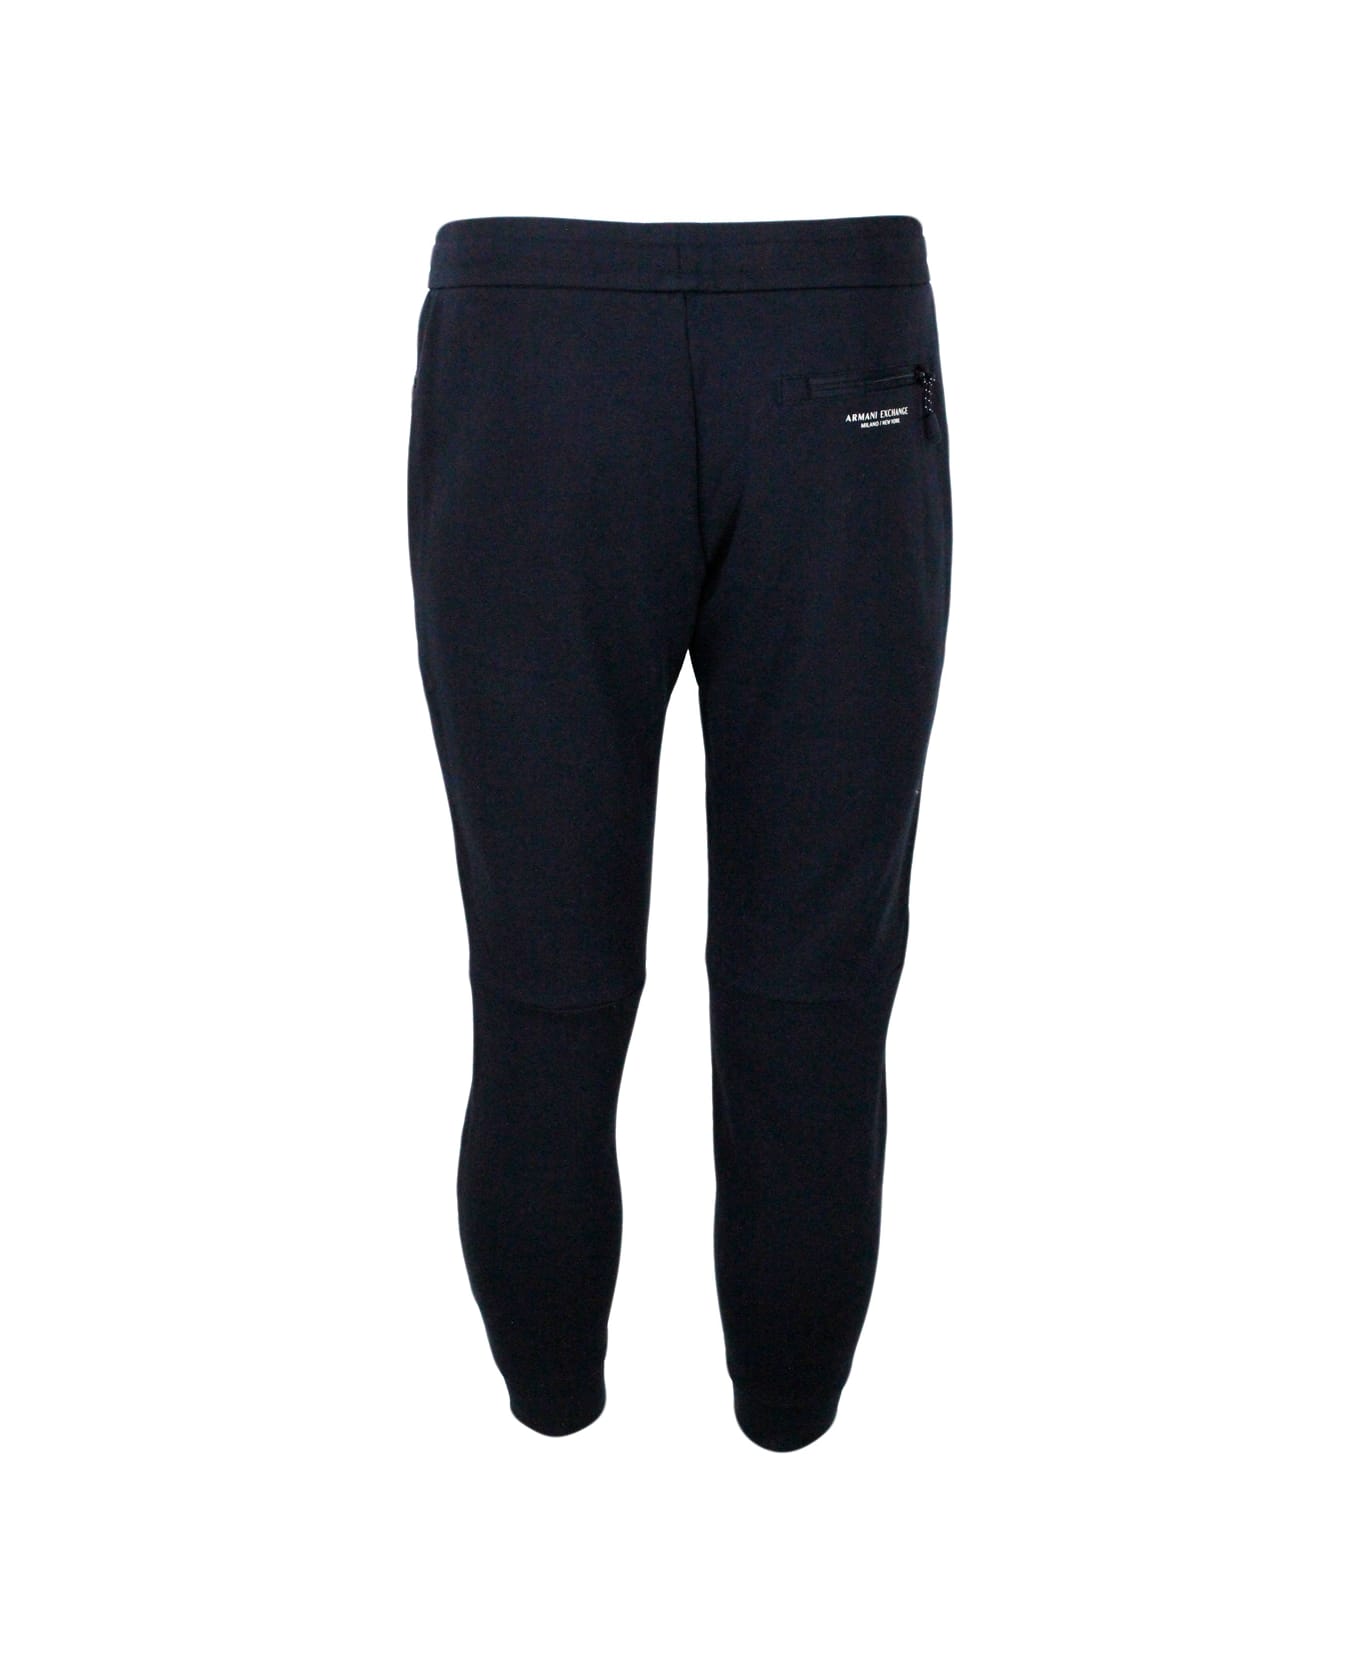 Armani Collezioni Cotton Fleece Jogging Trousers With Drawstring At The Waist And Cuff At The Bottom - Blu